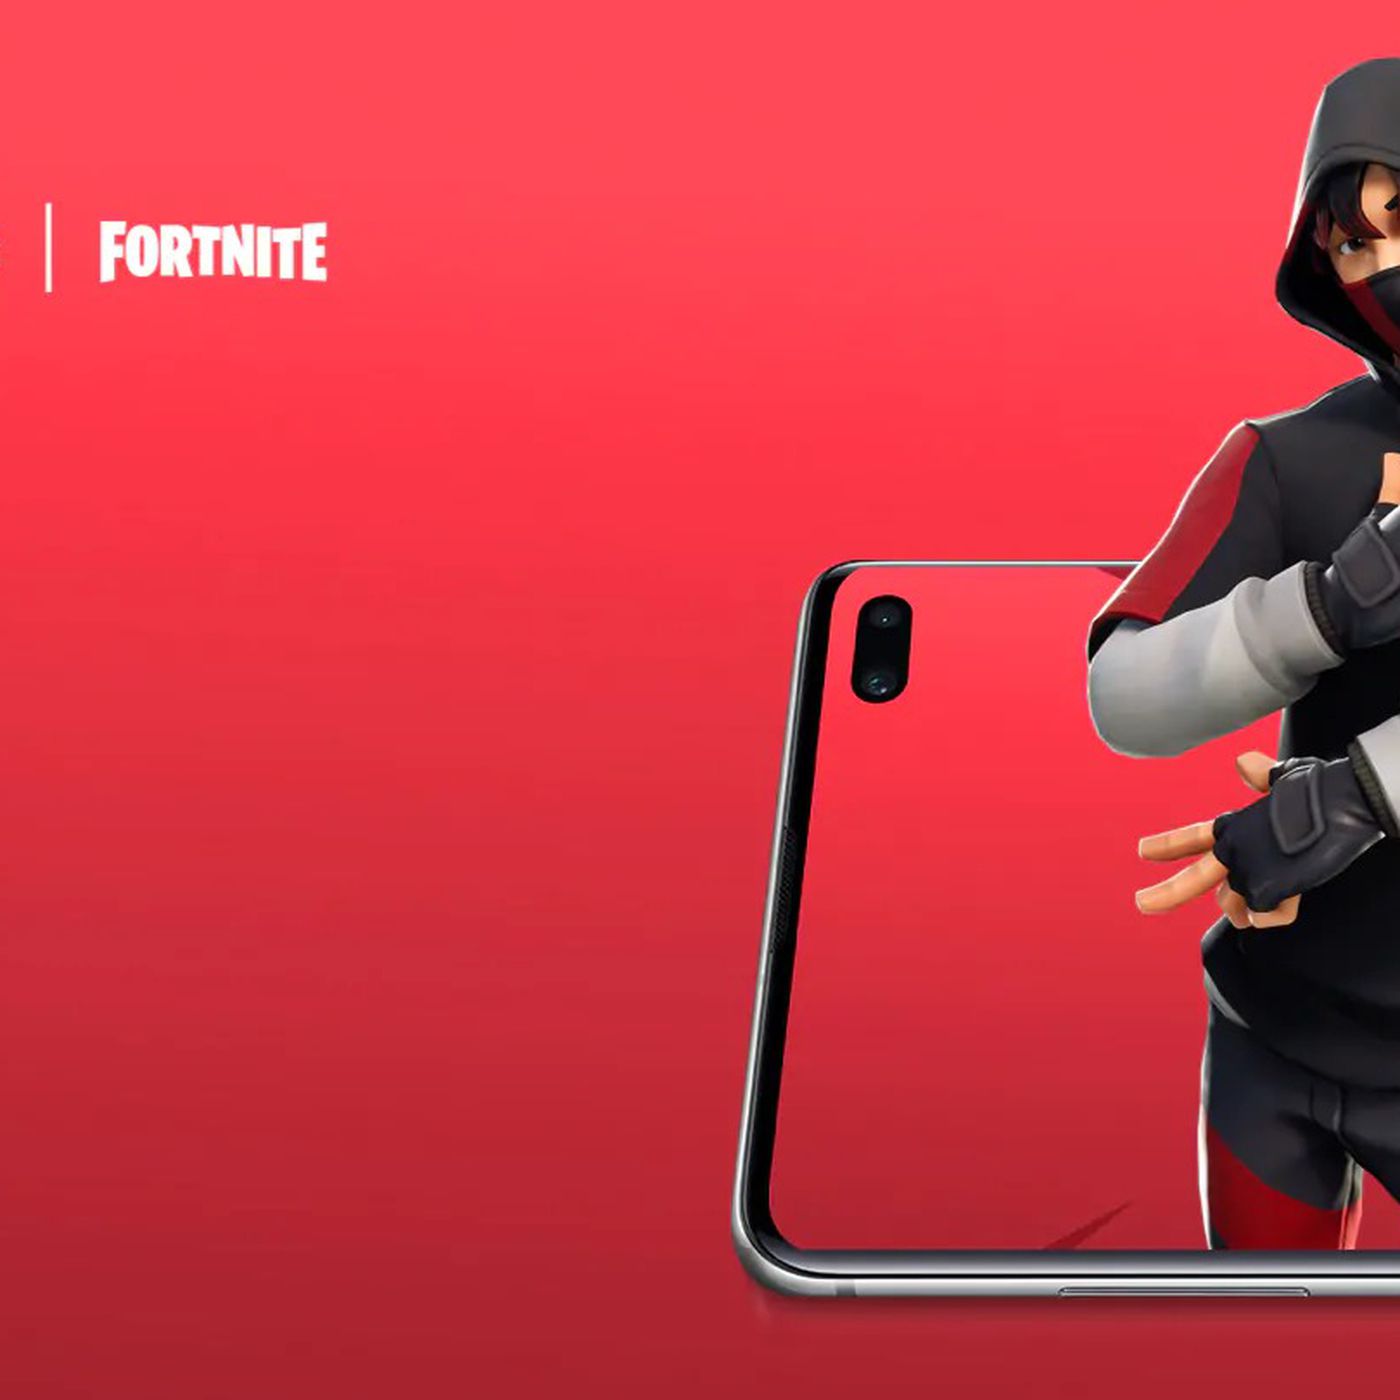 Indflydelse Shipwreck Profet Galaxy S10 Plus preorders will come with an exclusive Fortnite skin - The  Verge